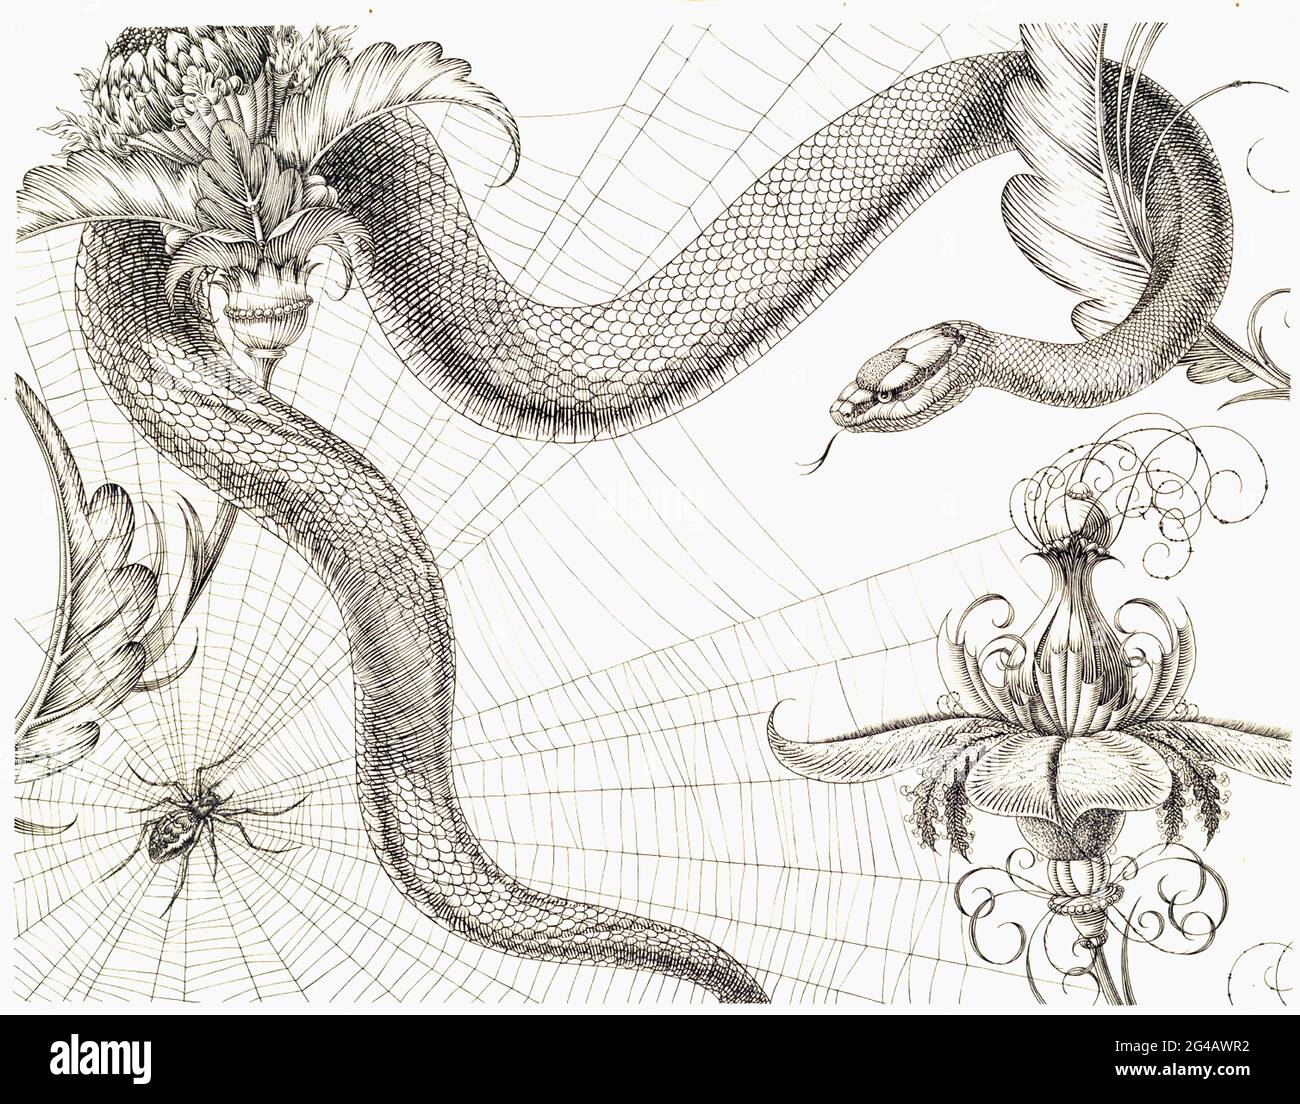 Henry Weston Keen - Spider, Web, Snake and Flowers - The Duchess of Malfi - c1930 Stock Photo